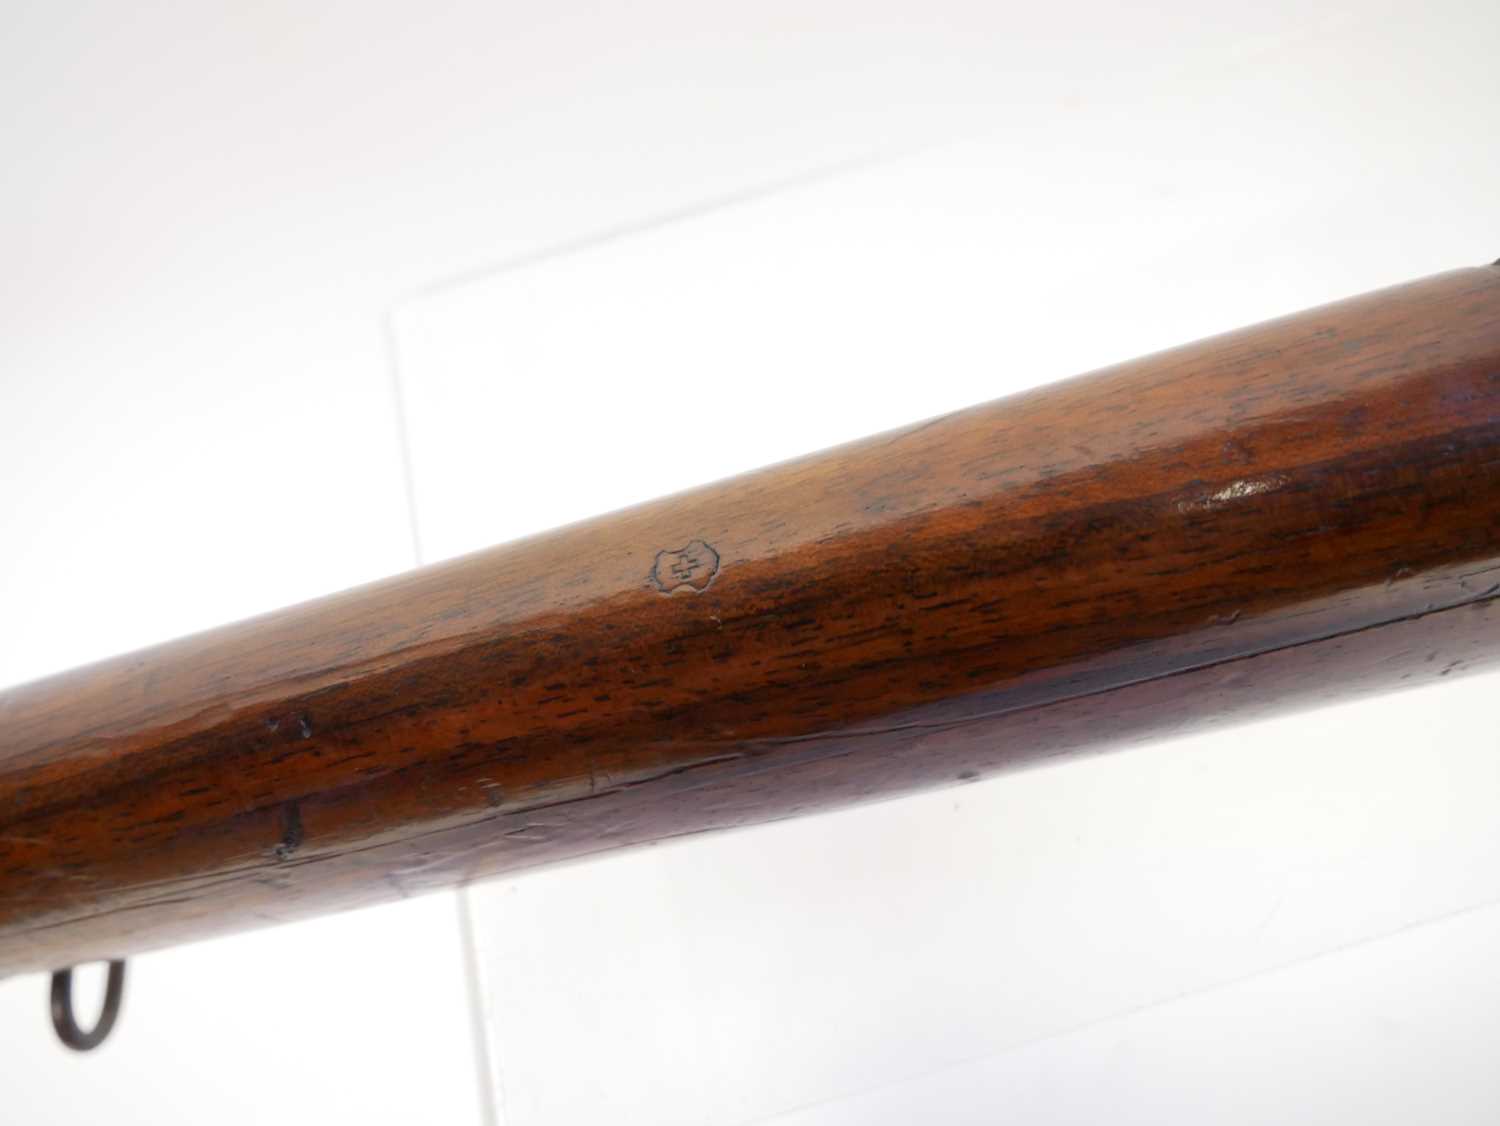 Schmidt Rubin 1889 7.5x 53.5mm straight pull rifle, matching serial numbers 119667, with 30" barrel, - Image 19 of 20